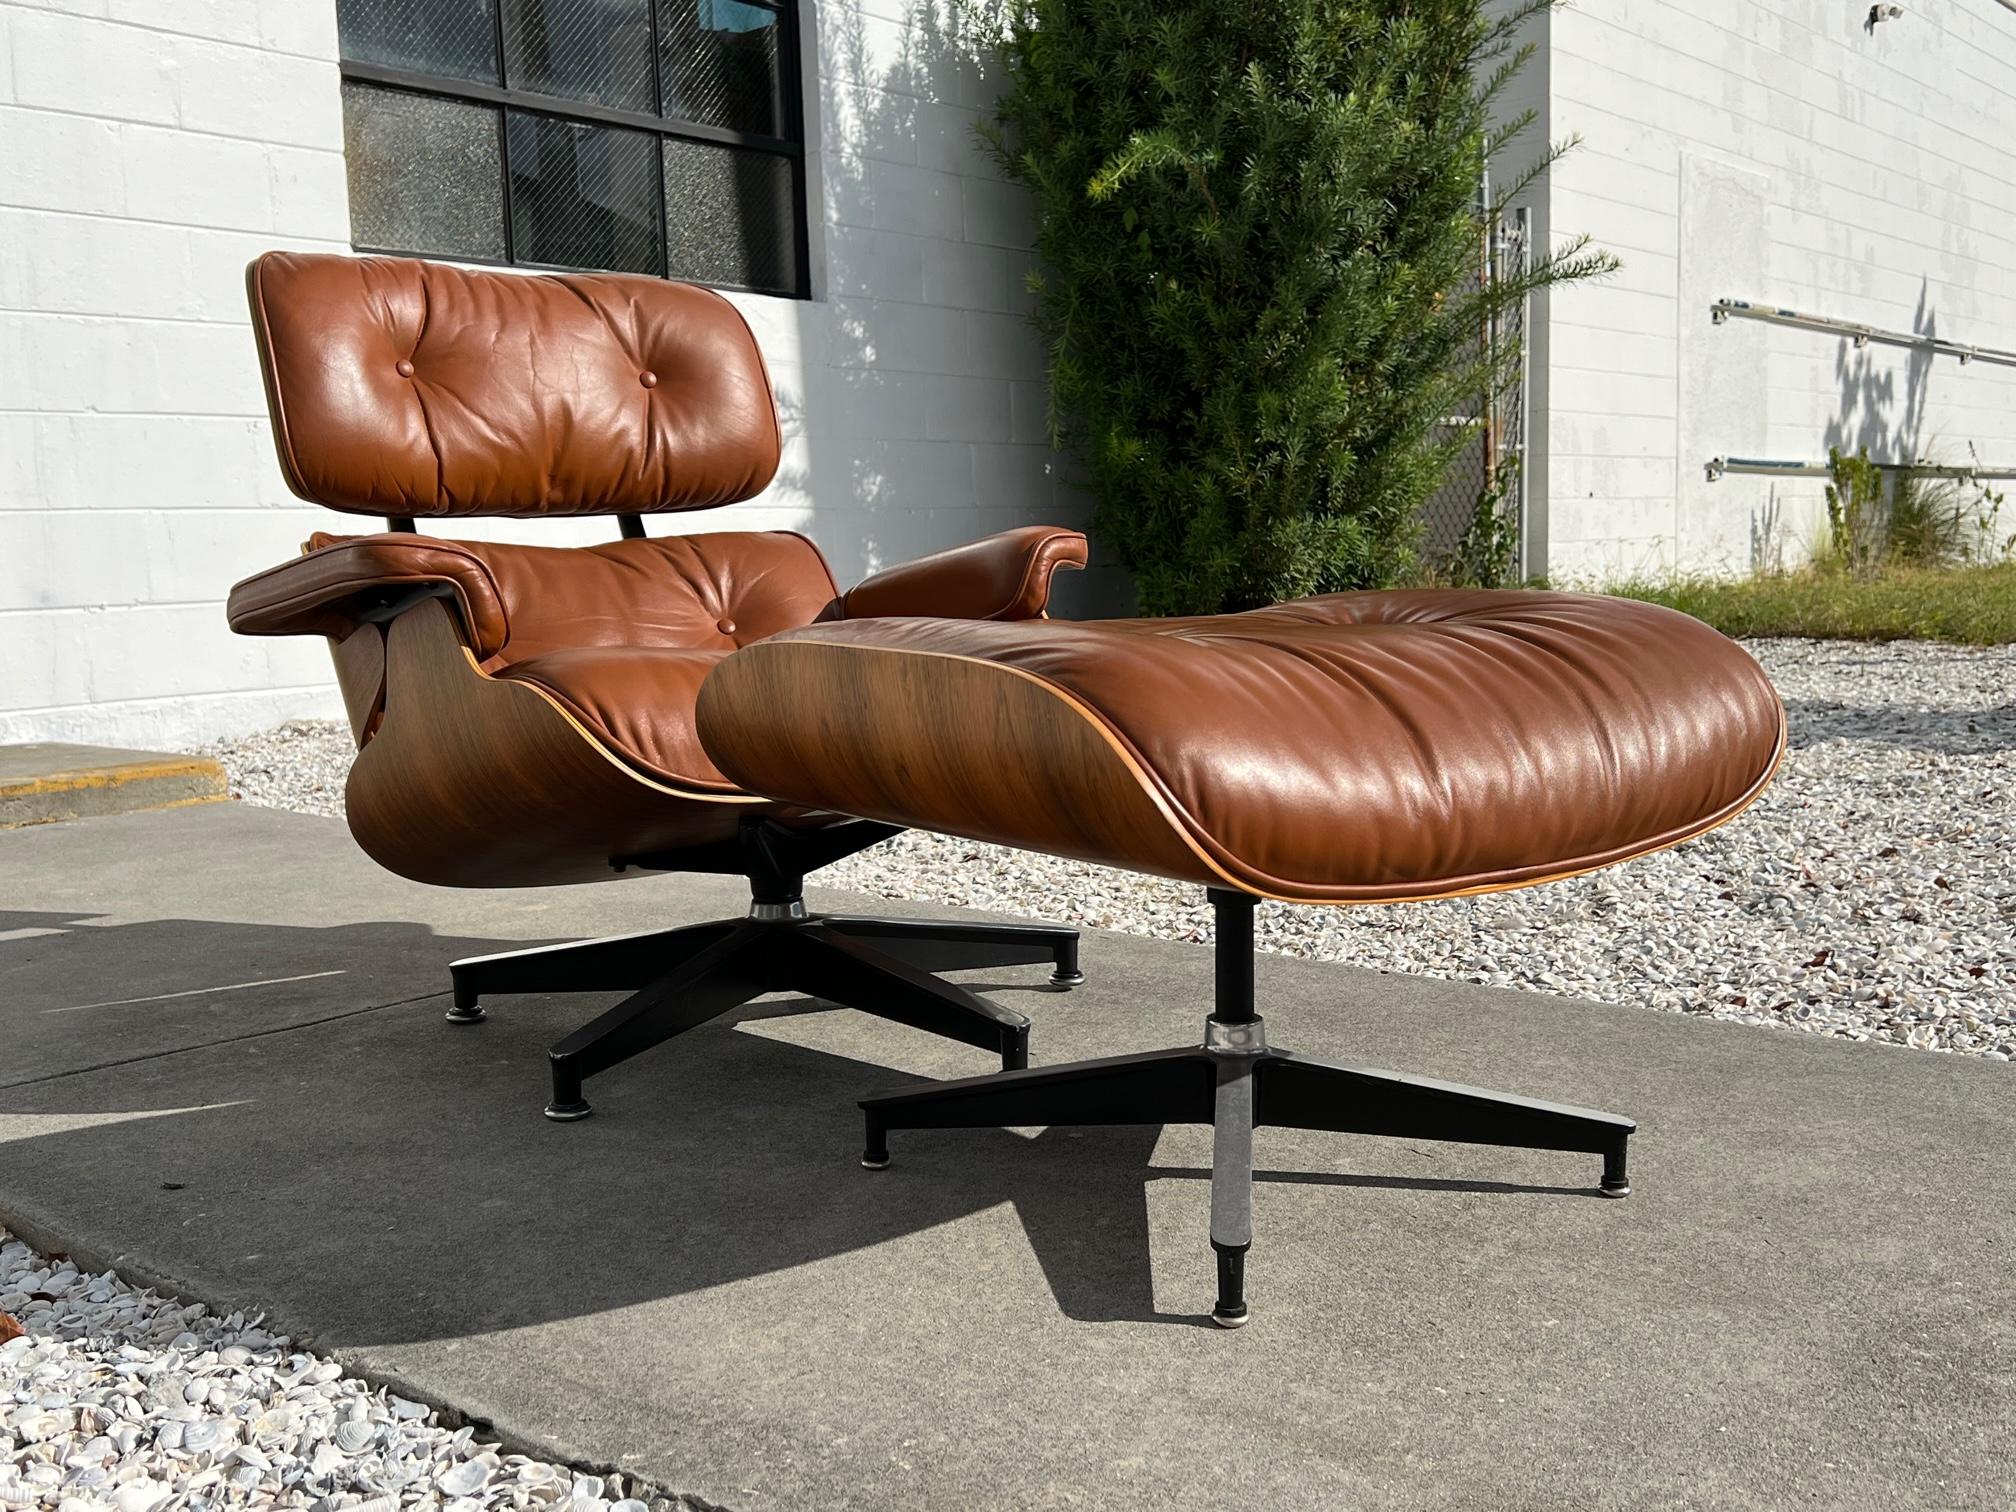 Classic Charles Eames Herman Miller Lounge Chair 1980's Cognac Brown Leather 6